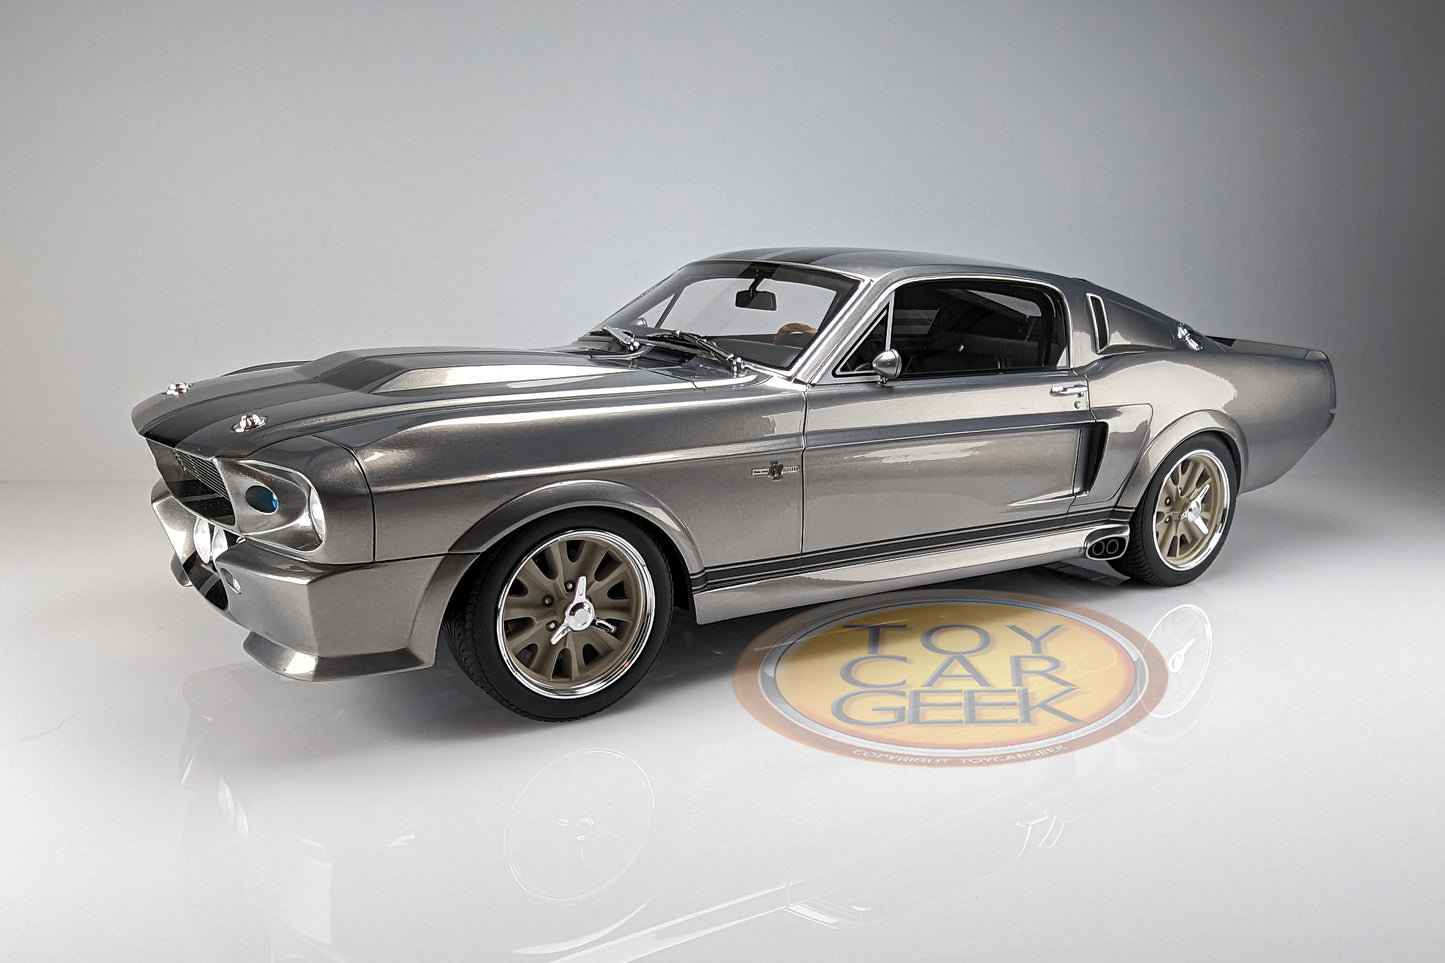 1967 Ford Mustang Shelby GT500 "Eleanor"